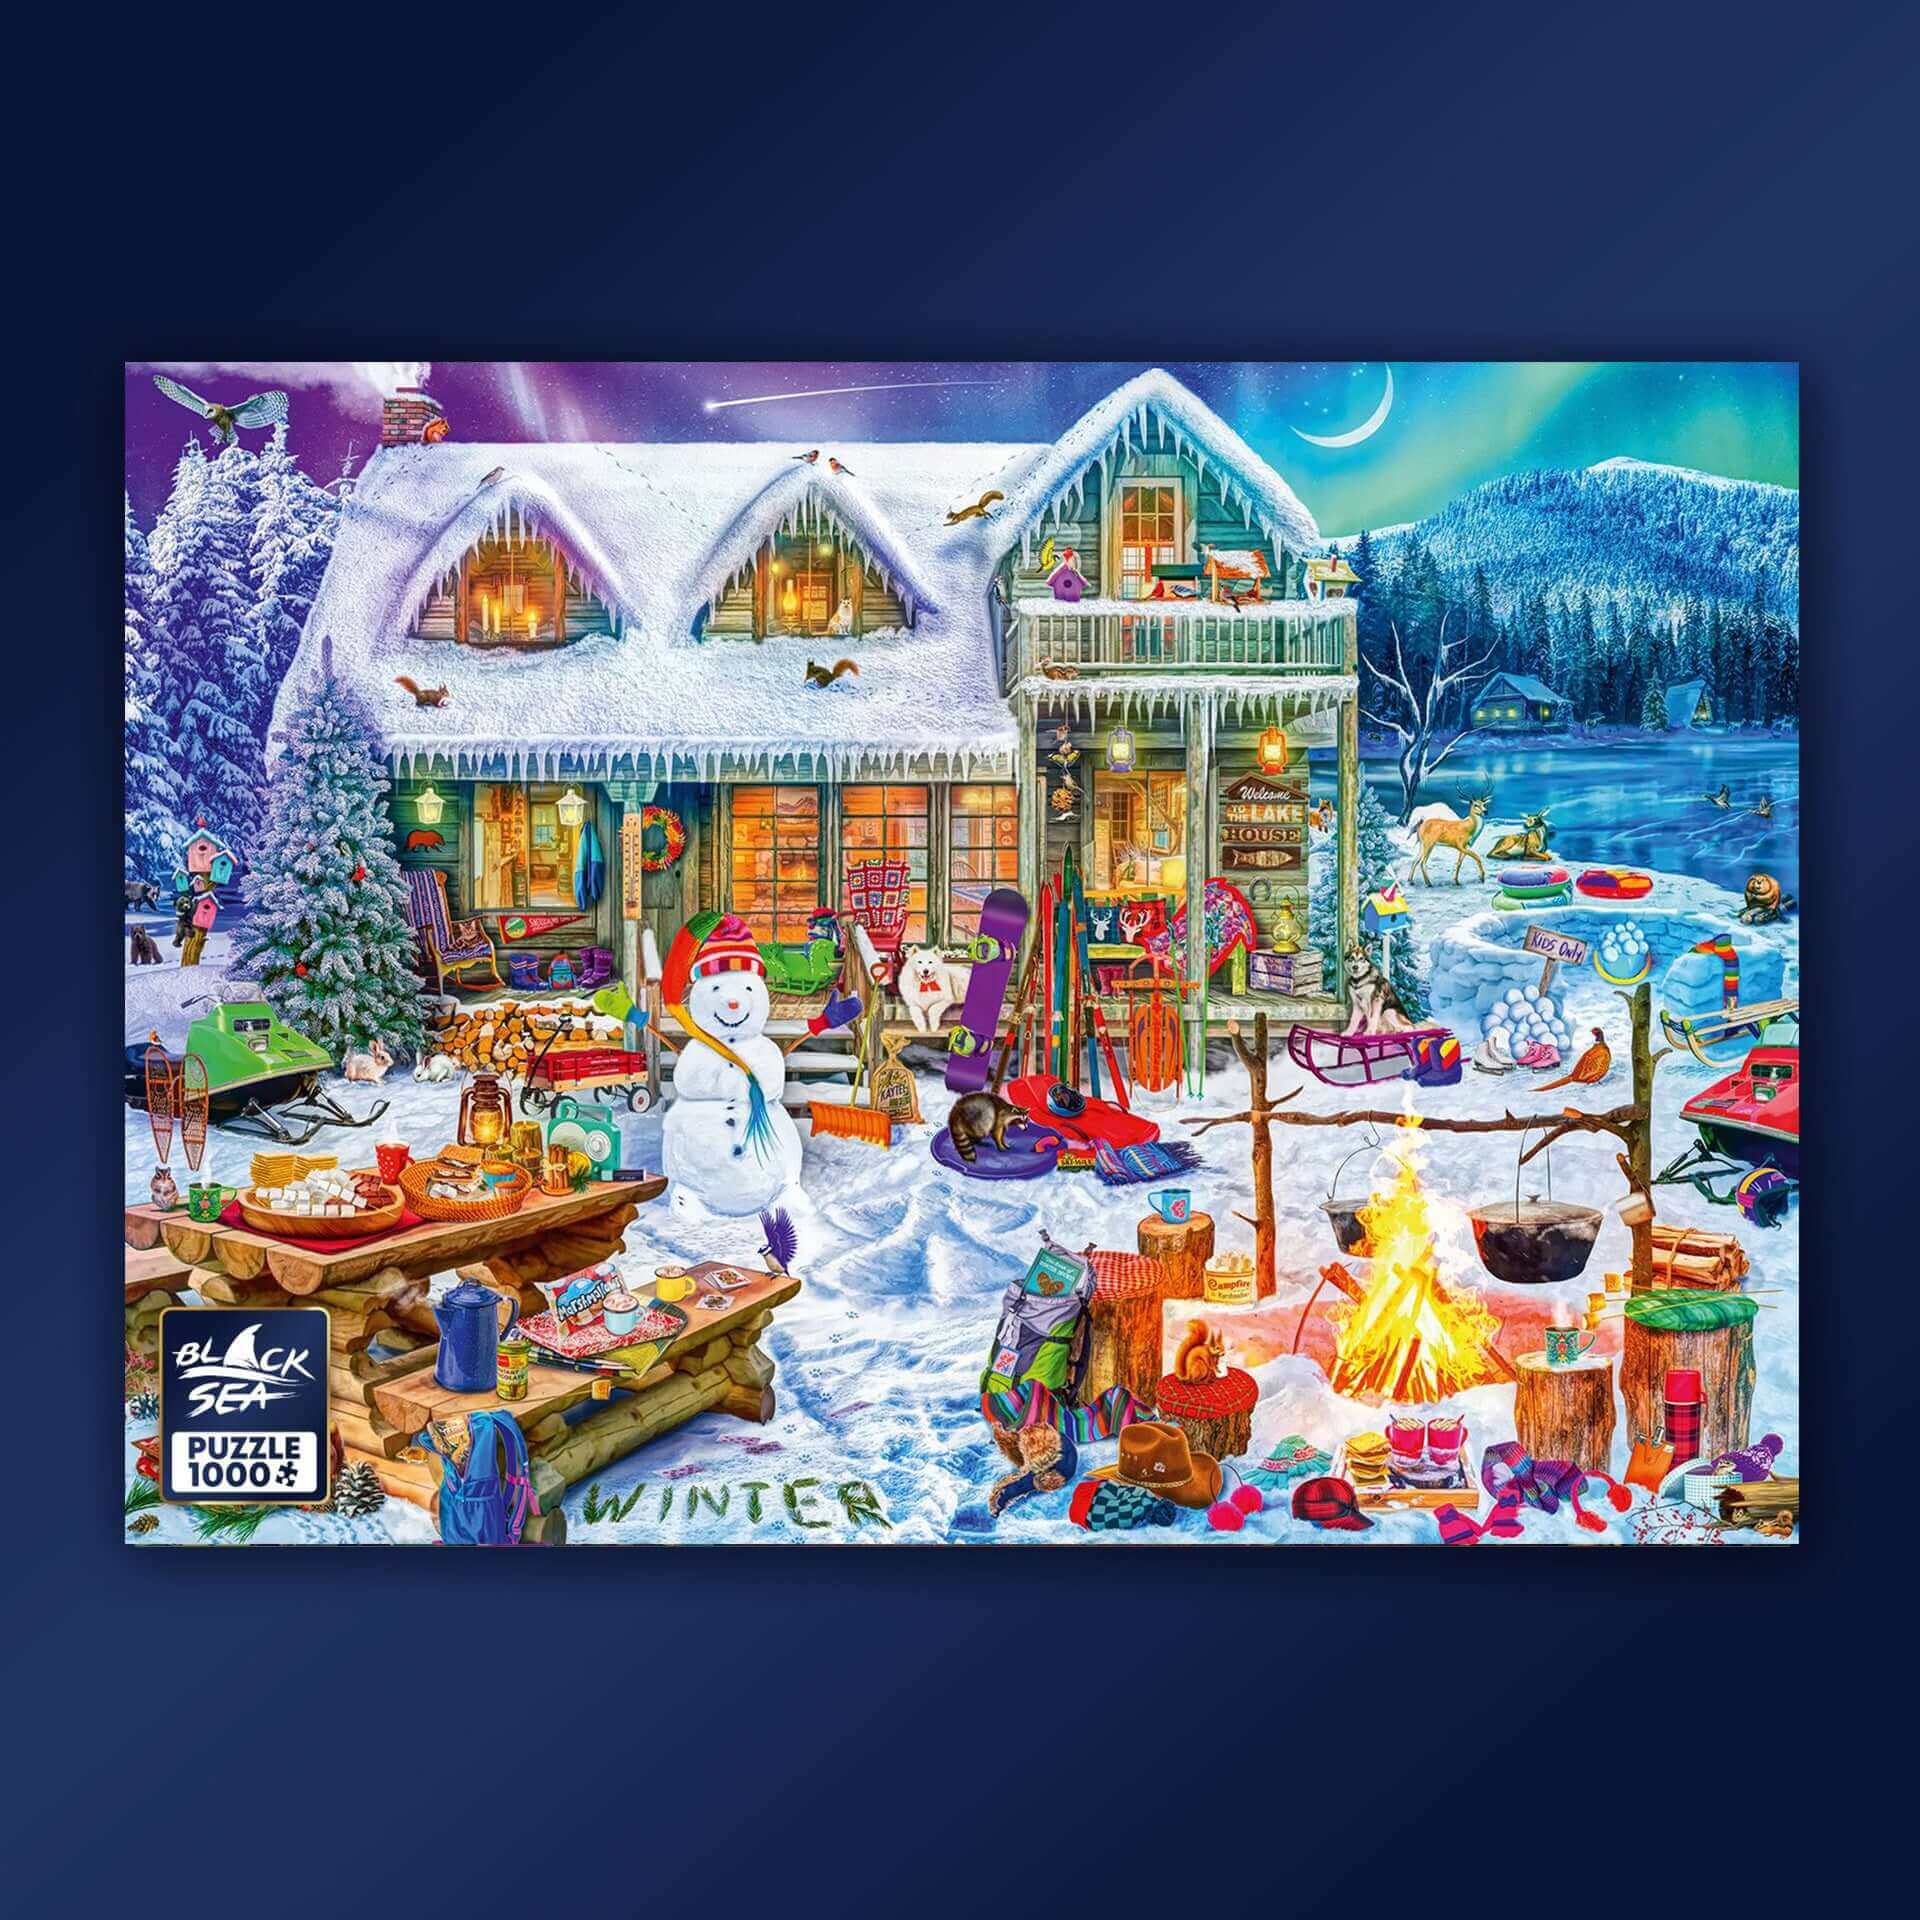 Puzzle Black Sea Premium 1000 pieces - The Joys of Winter, Experience the wintertime joys with a cup of hot chocolate in your hand, a favourite blanket, and a puzzle, which breathes life into the perfect winter imagined by you! Merry-making, figures made